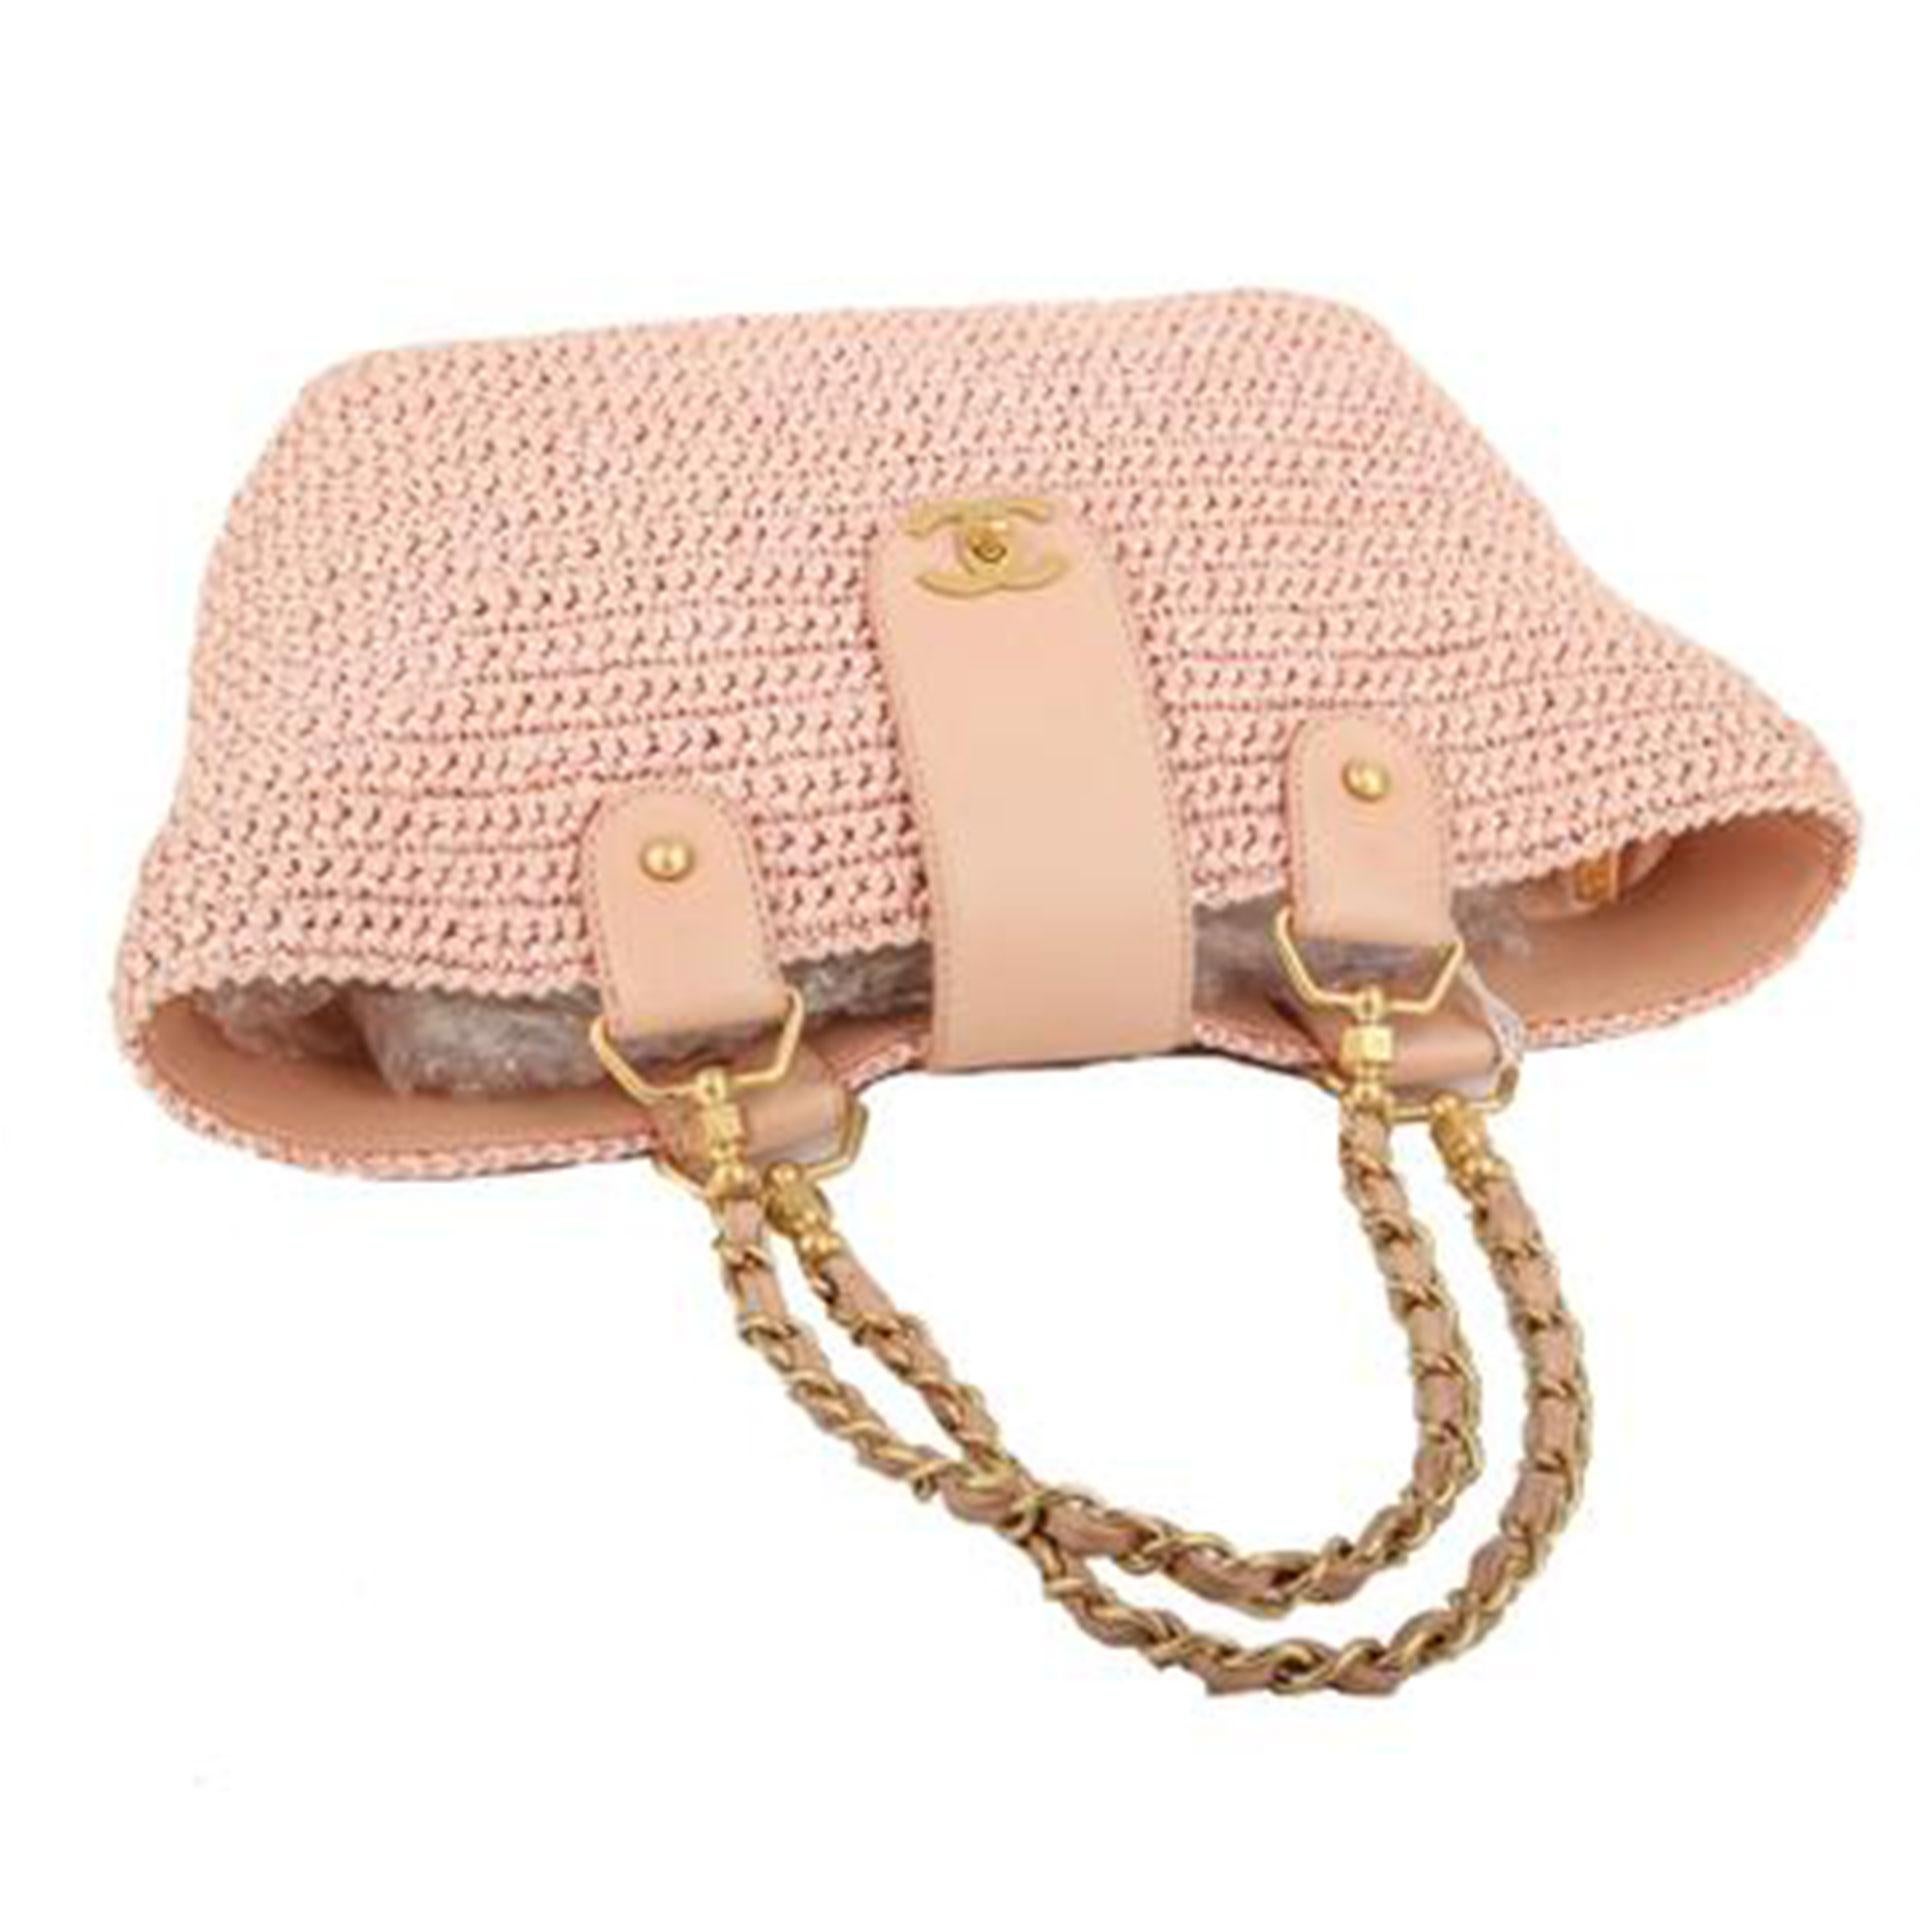 Beige Chanel 2005 Rare Vintage Raffia Woven Pink Straw and Leather Basket Tote For Sale